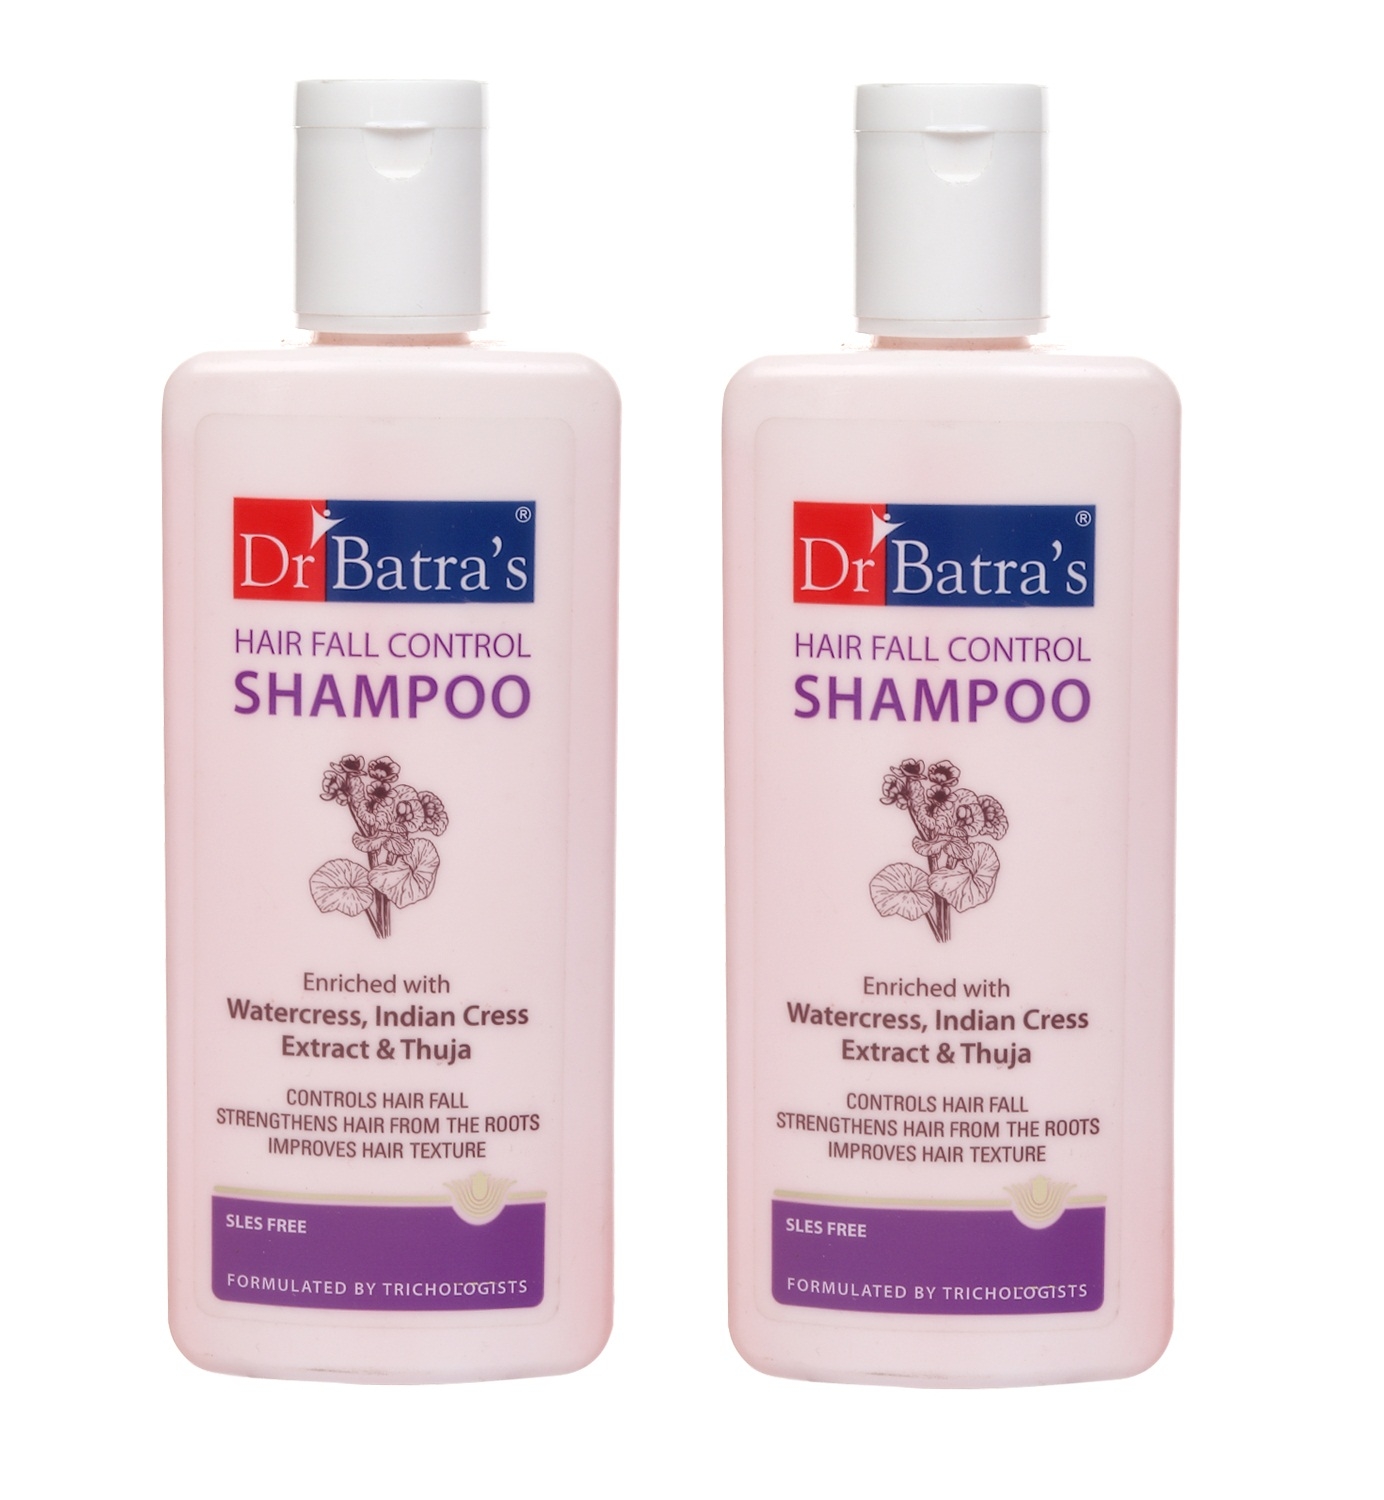 Dr Batra's | Dr Batra's Hair Fall Control Shampoo Enriched With Watercress, Indian Cress extract and Thuja - 200 ml (Pack of 2)